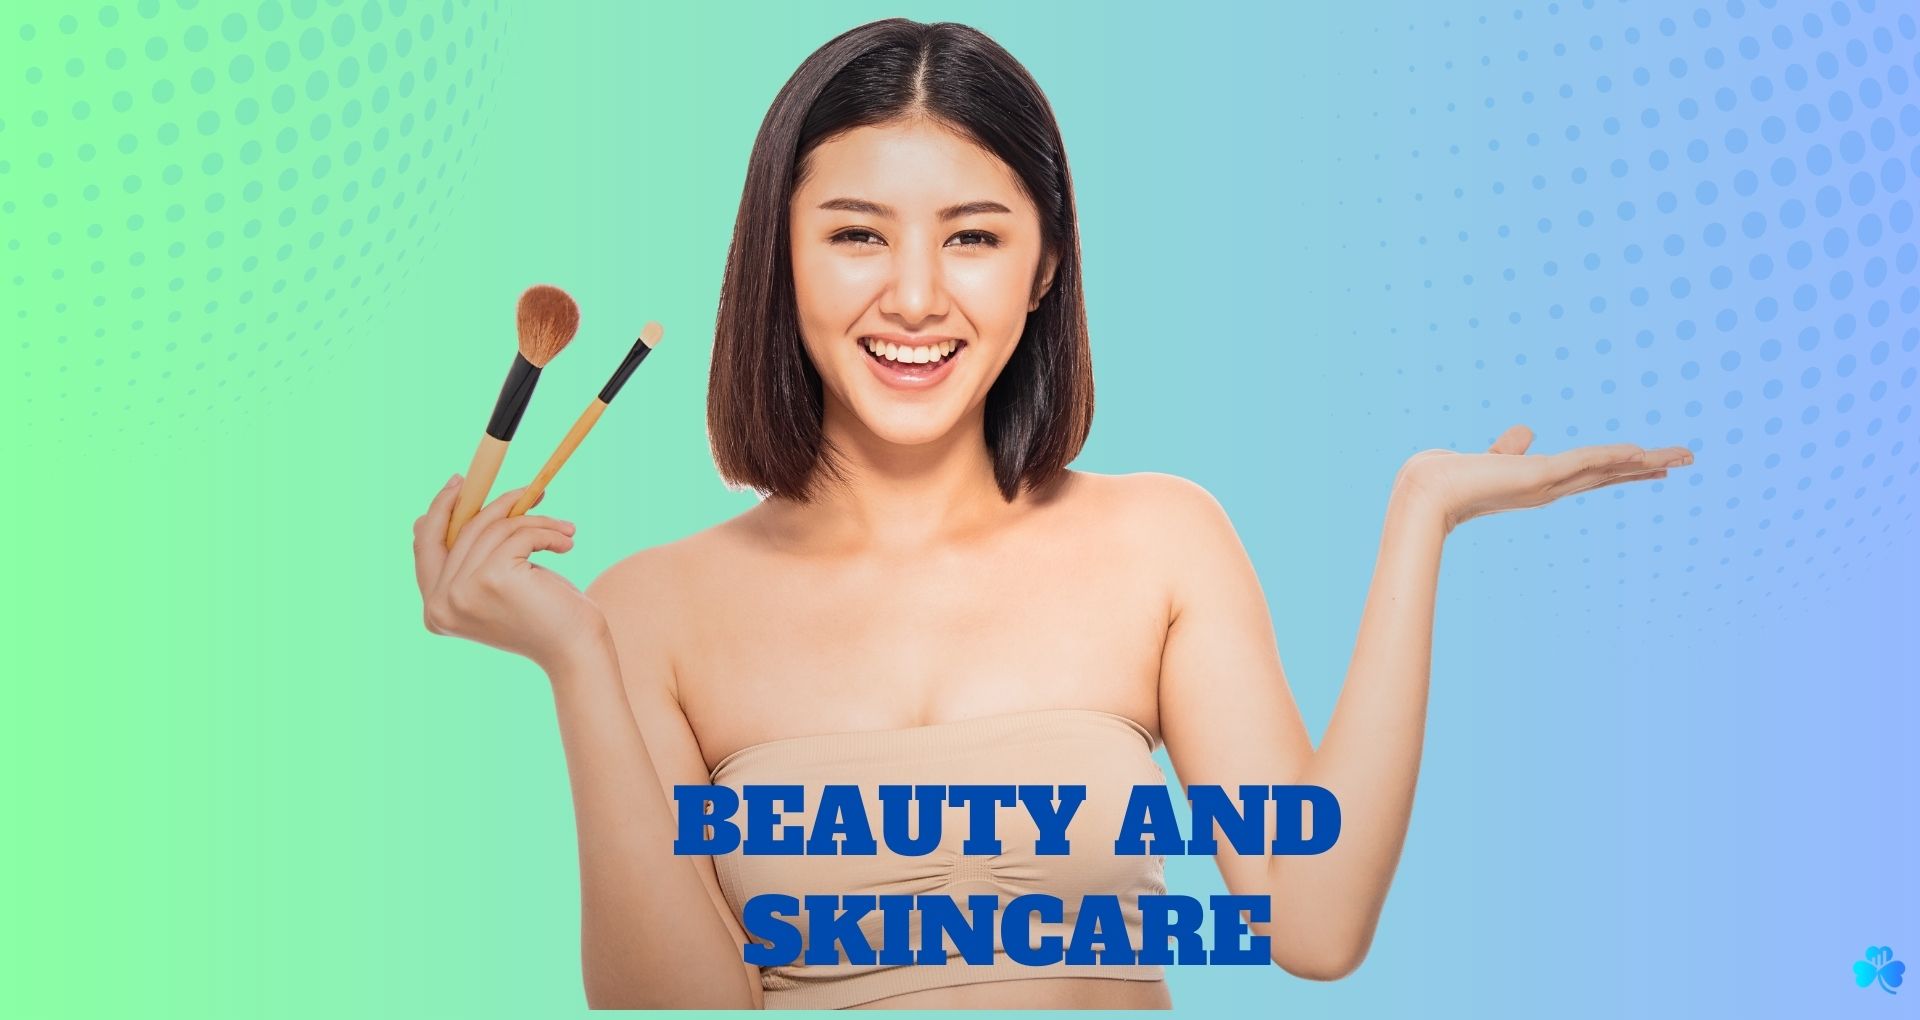 Beauty and skincare-young girl smiling holding beauty brushes